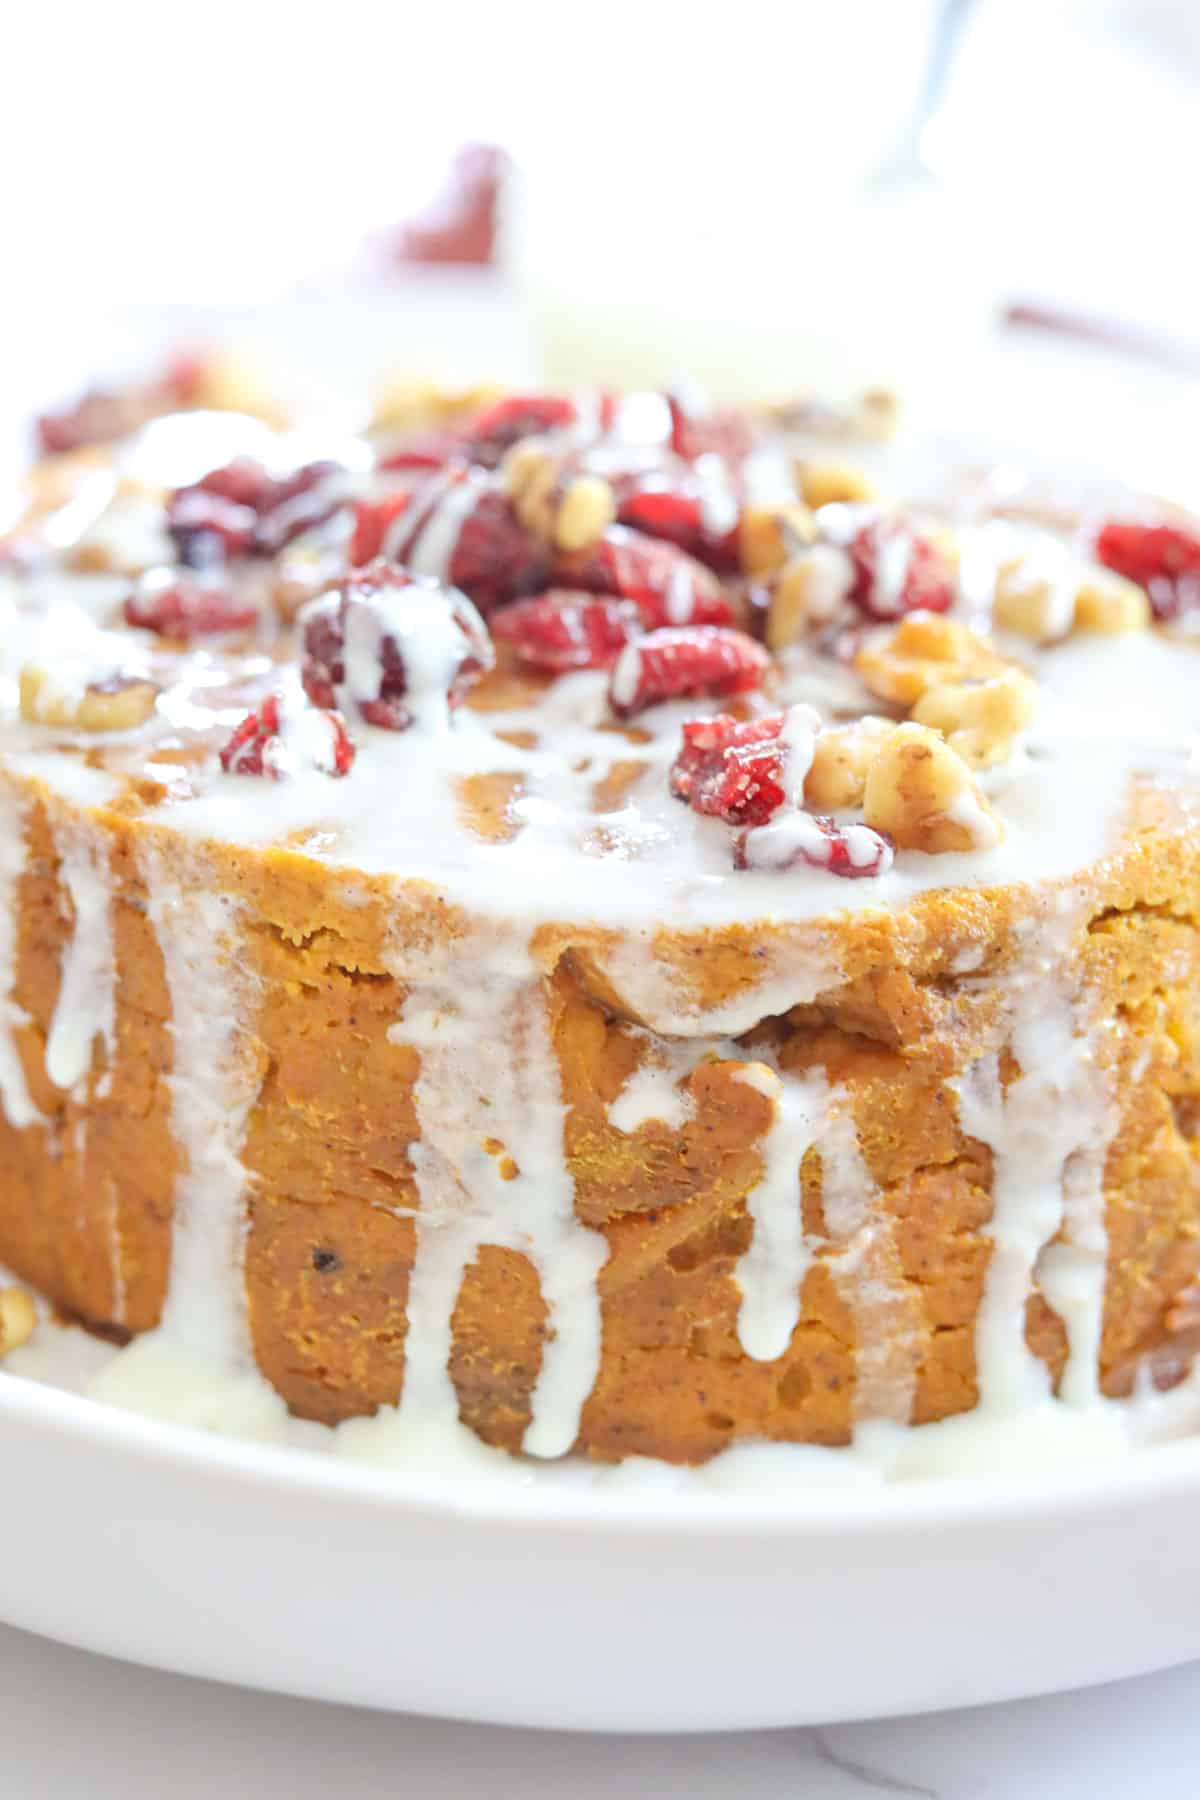 icing dripping down bread pudding with cranberries and candied walnuts